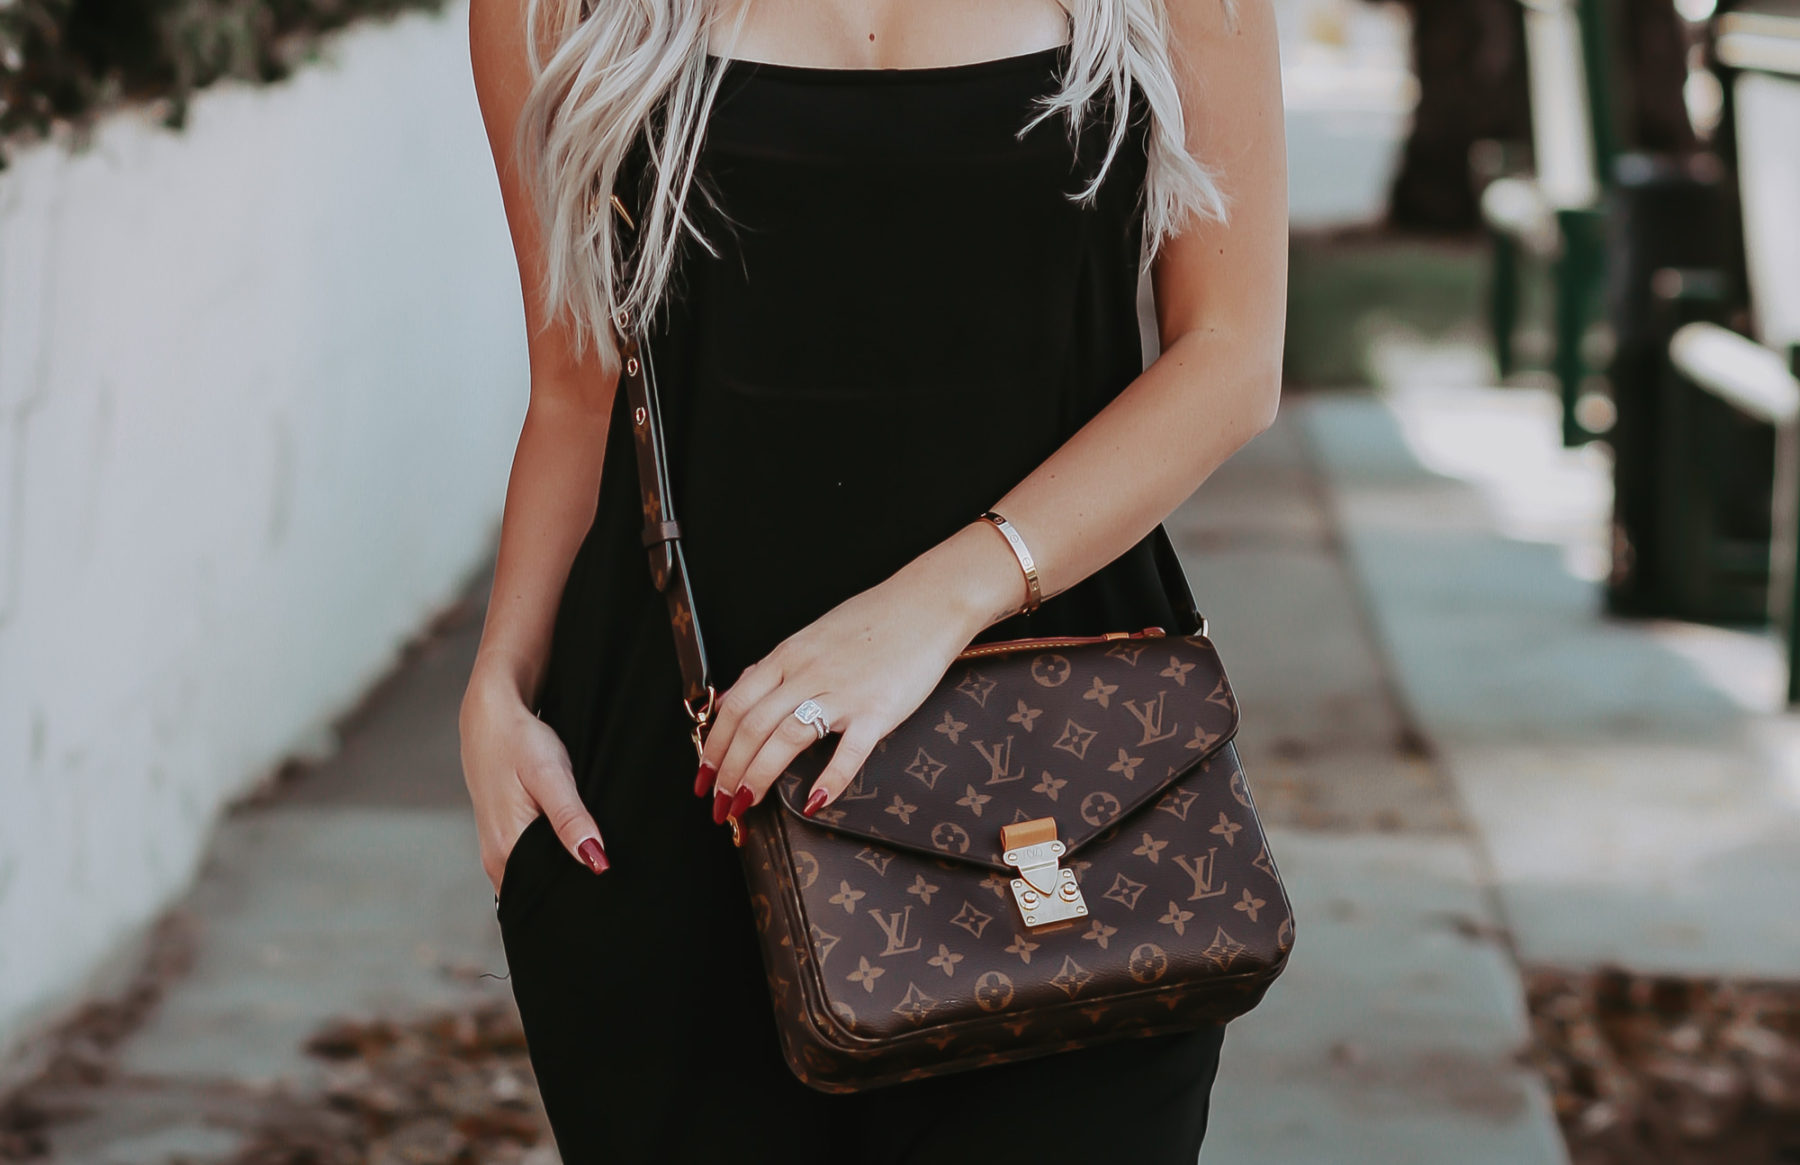 The Comfiest & Cutest Overalls, EVER | Louis Vuitton Pochette Metis | Louis Vuitton Shoes | Louis Vuitton Sandals | Blondie in the City by Hayley Larue